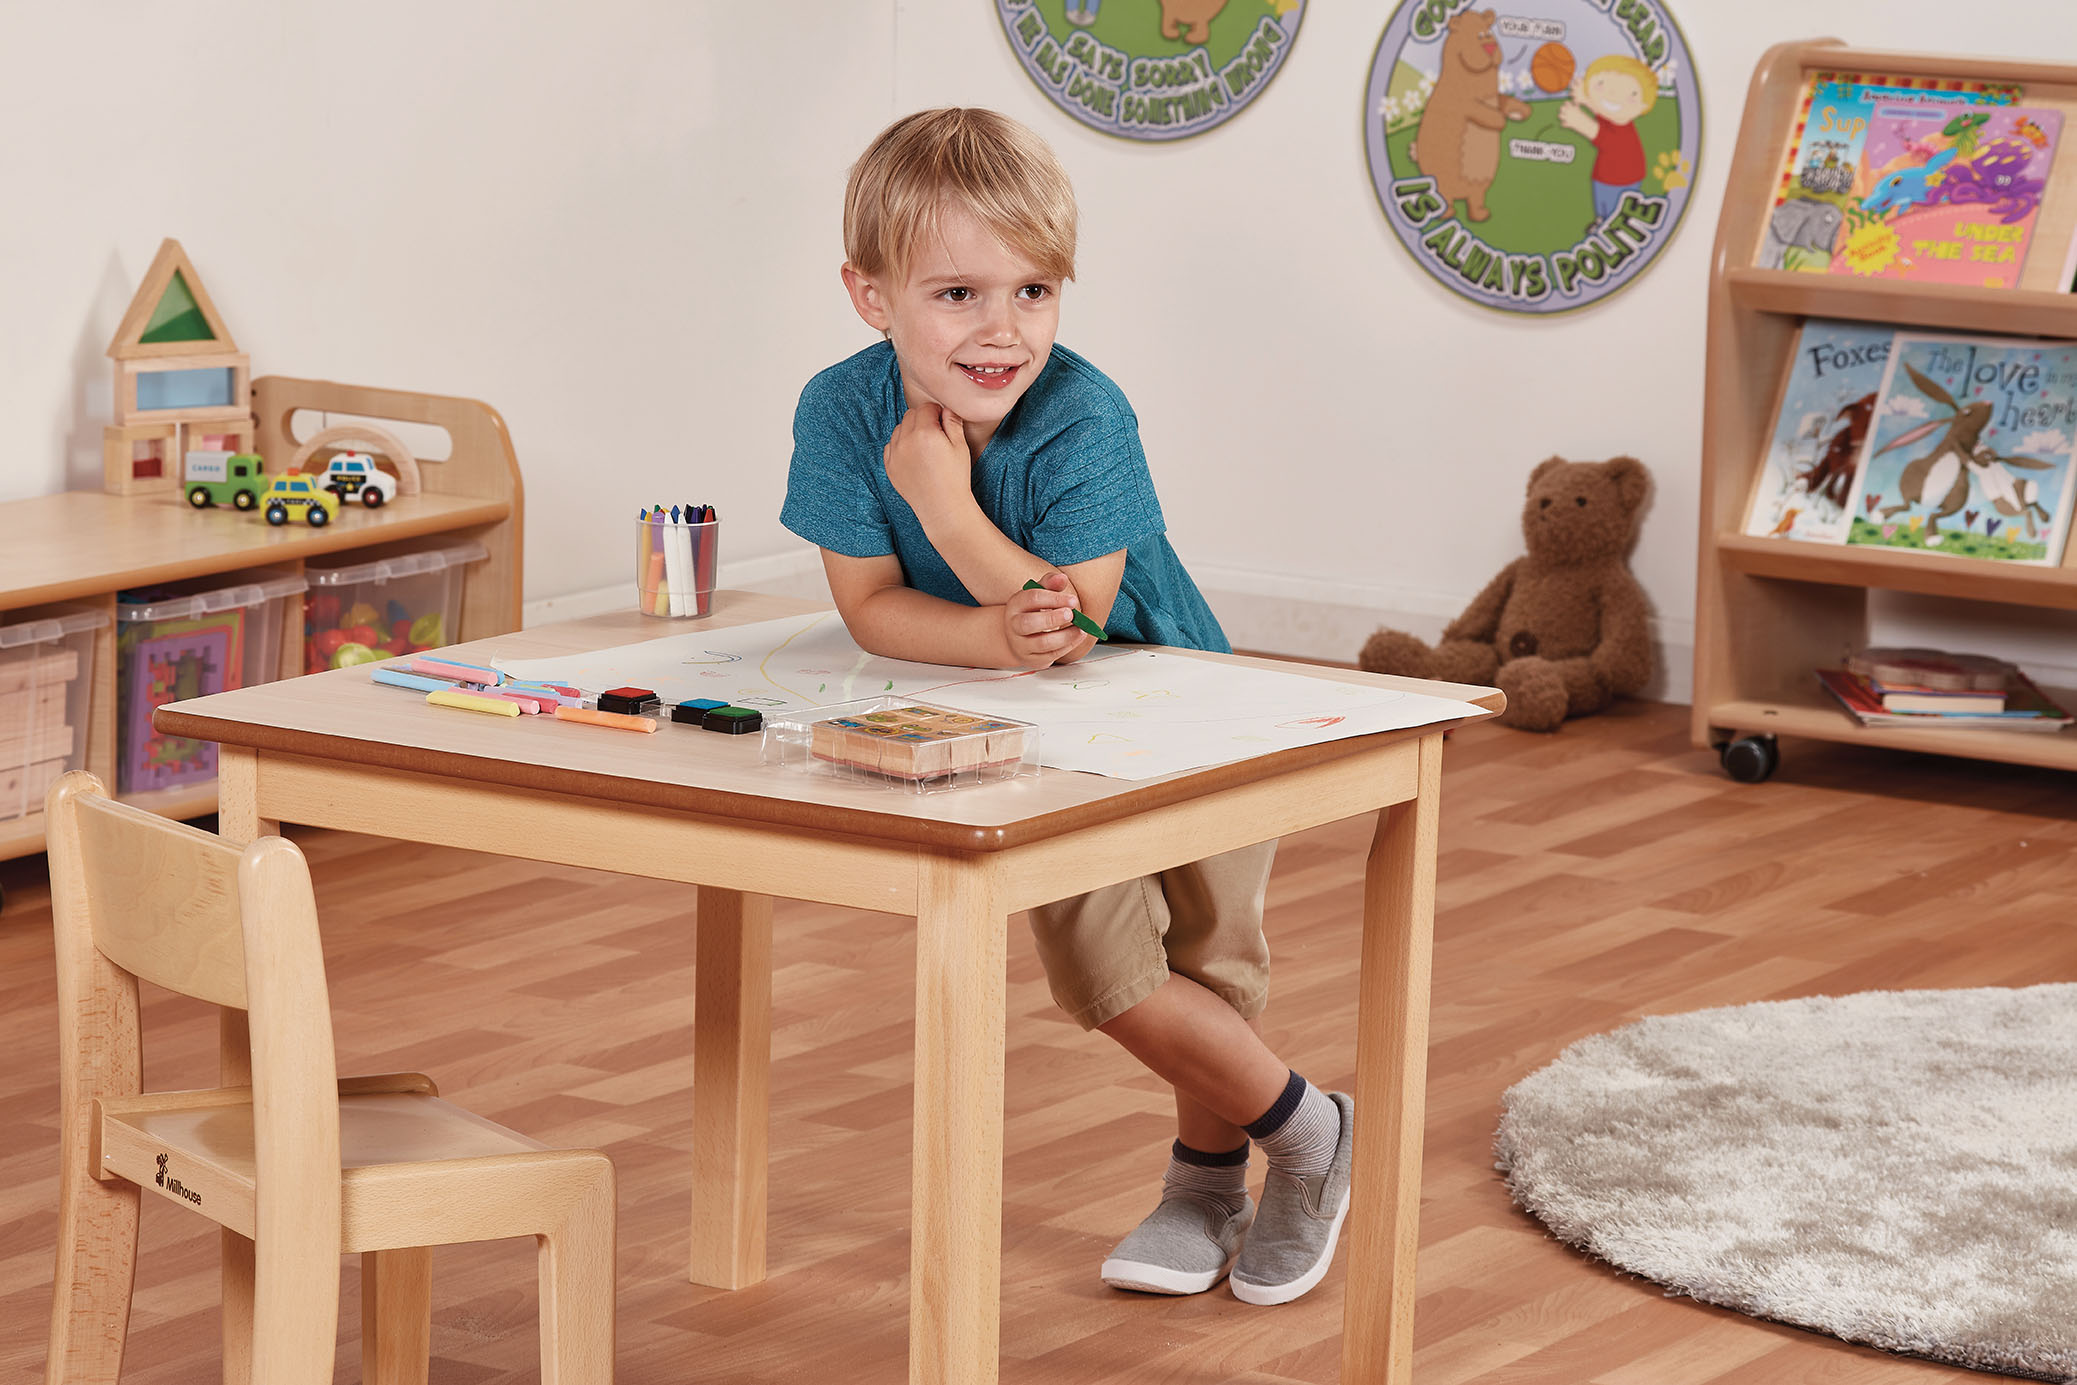 PT814-Millhouse-Early-Years-Furniture-Square-Table_Lifestyle_RGB.jpg